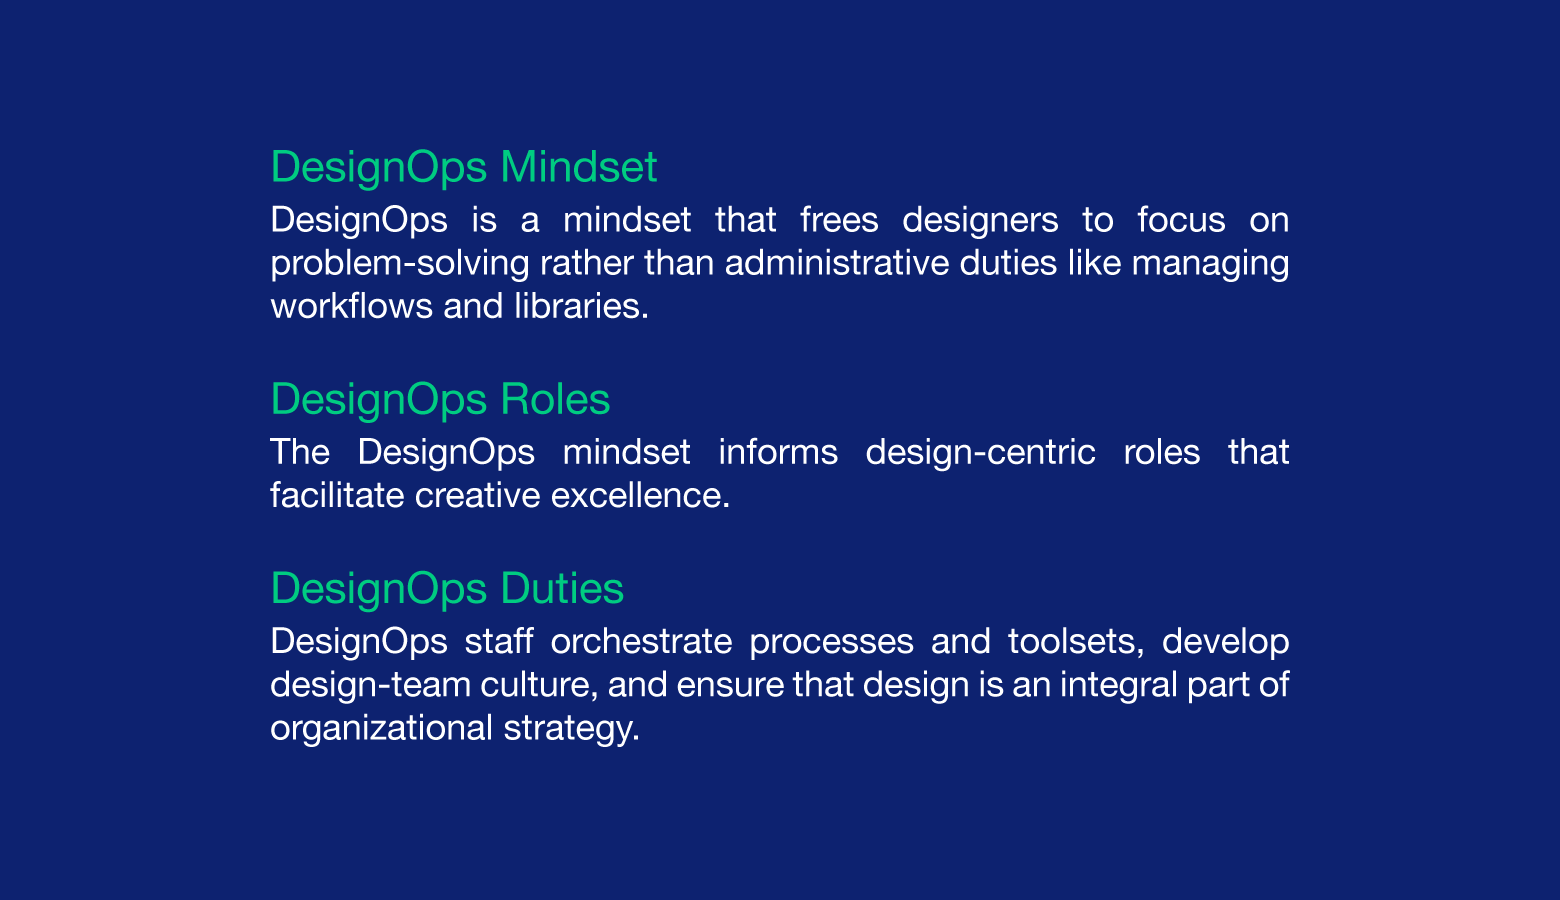 DesignOps is a mindset from which flows roles, duties, and processes.